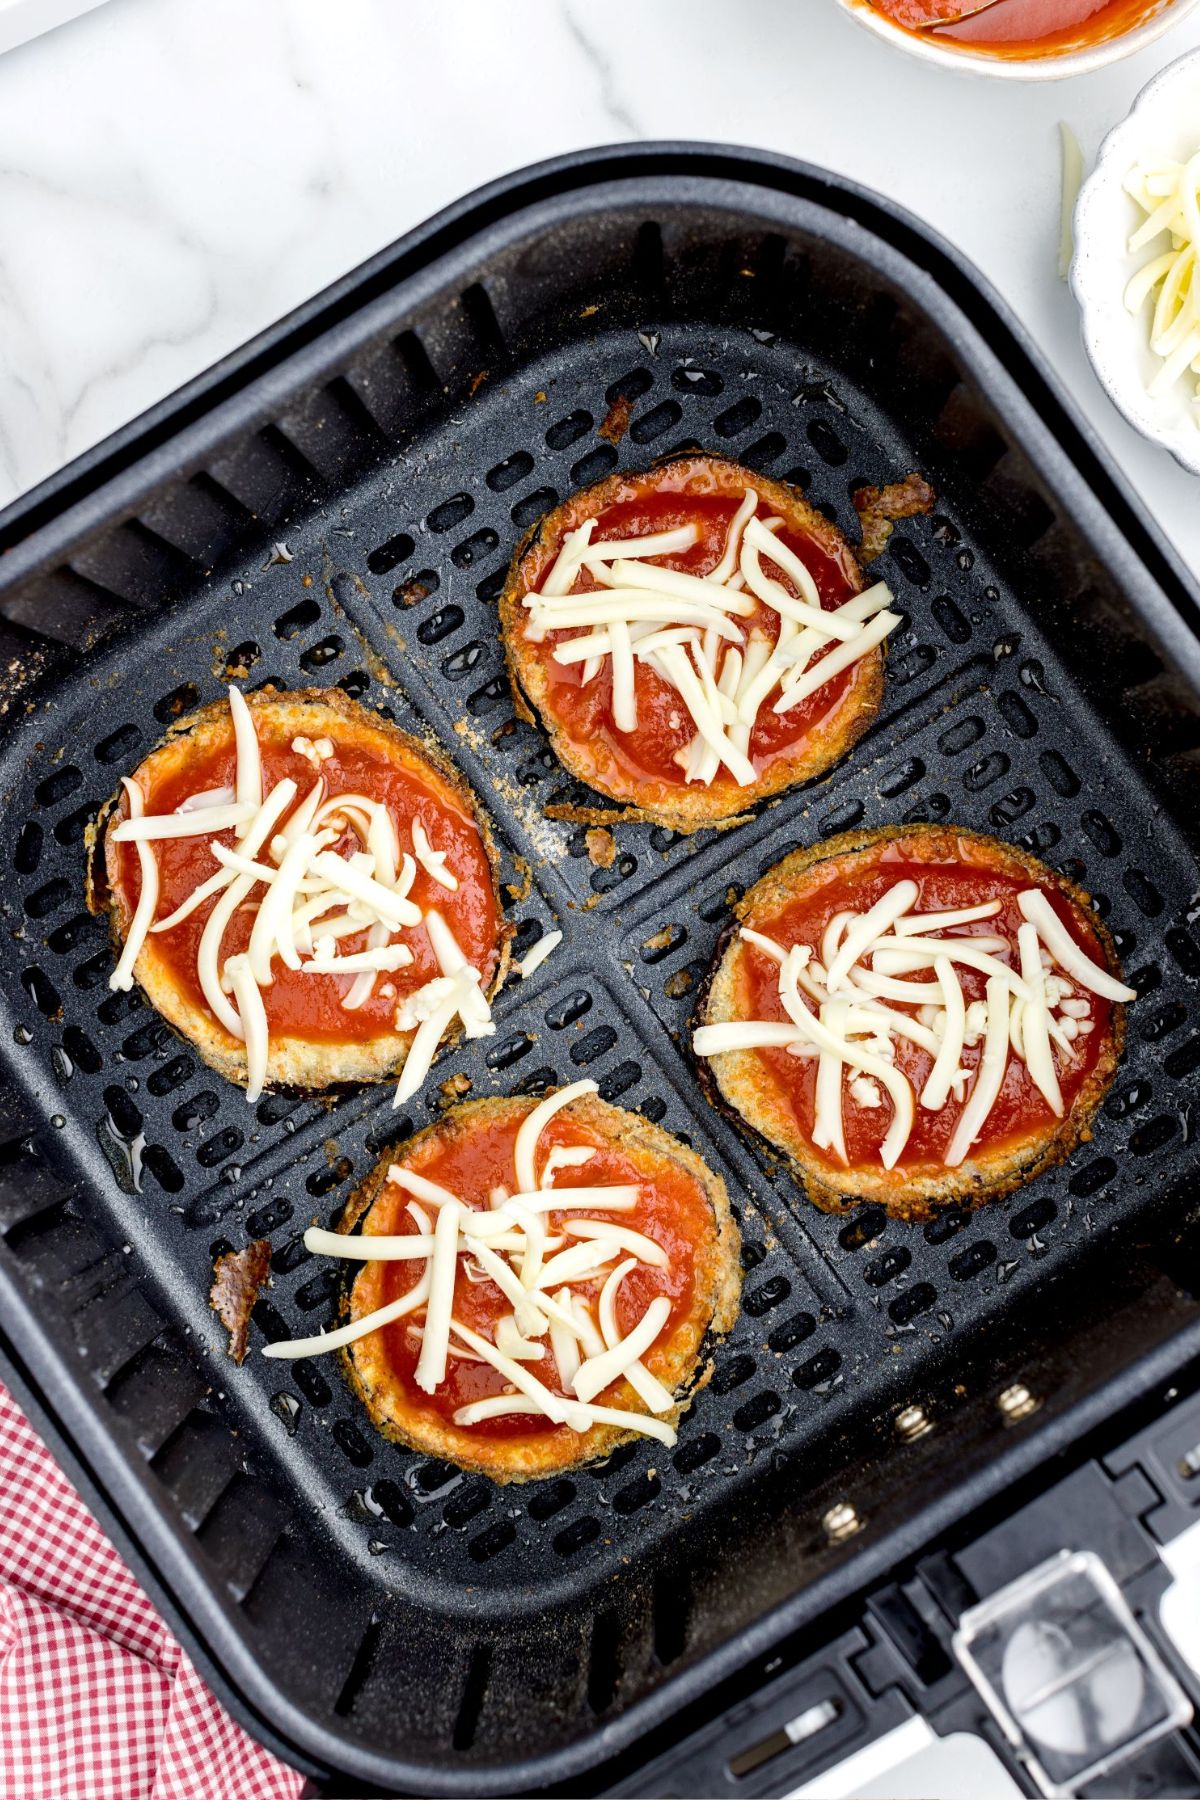 Crispy eggplant sliced with marinara sauce and cheese topped in the air fryer basket.